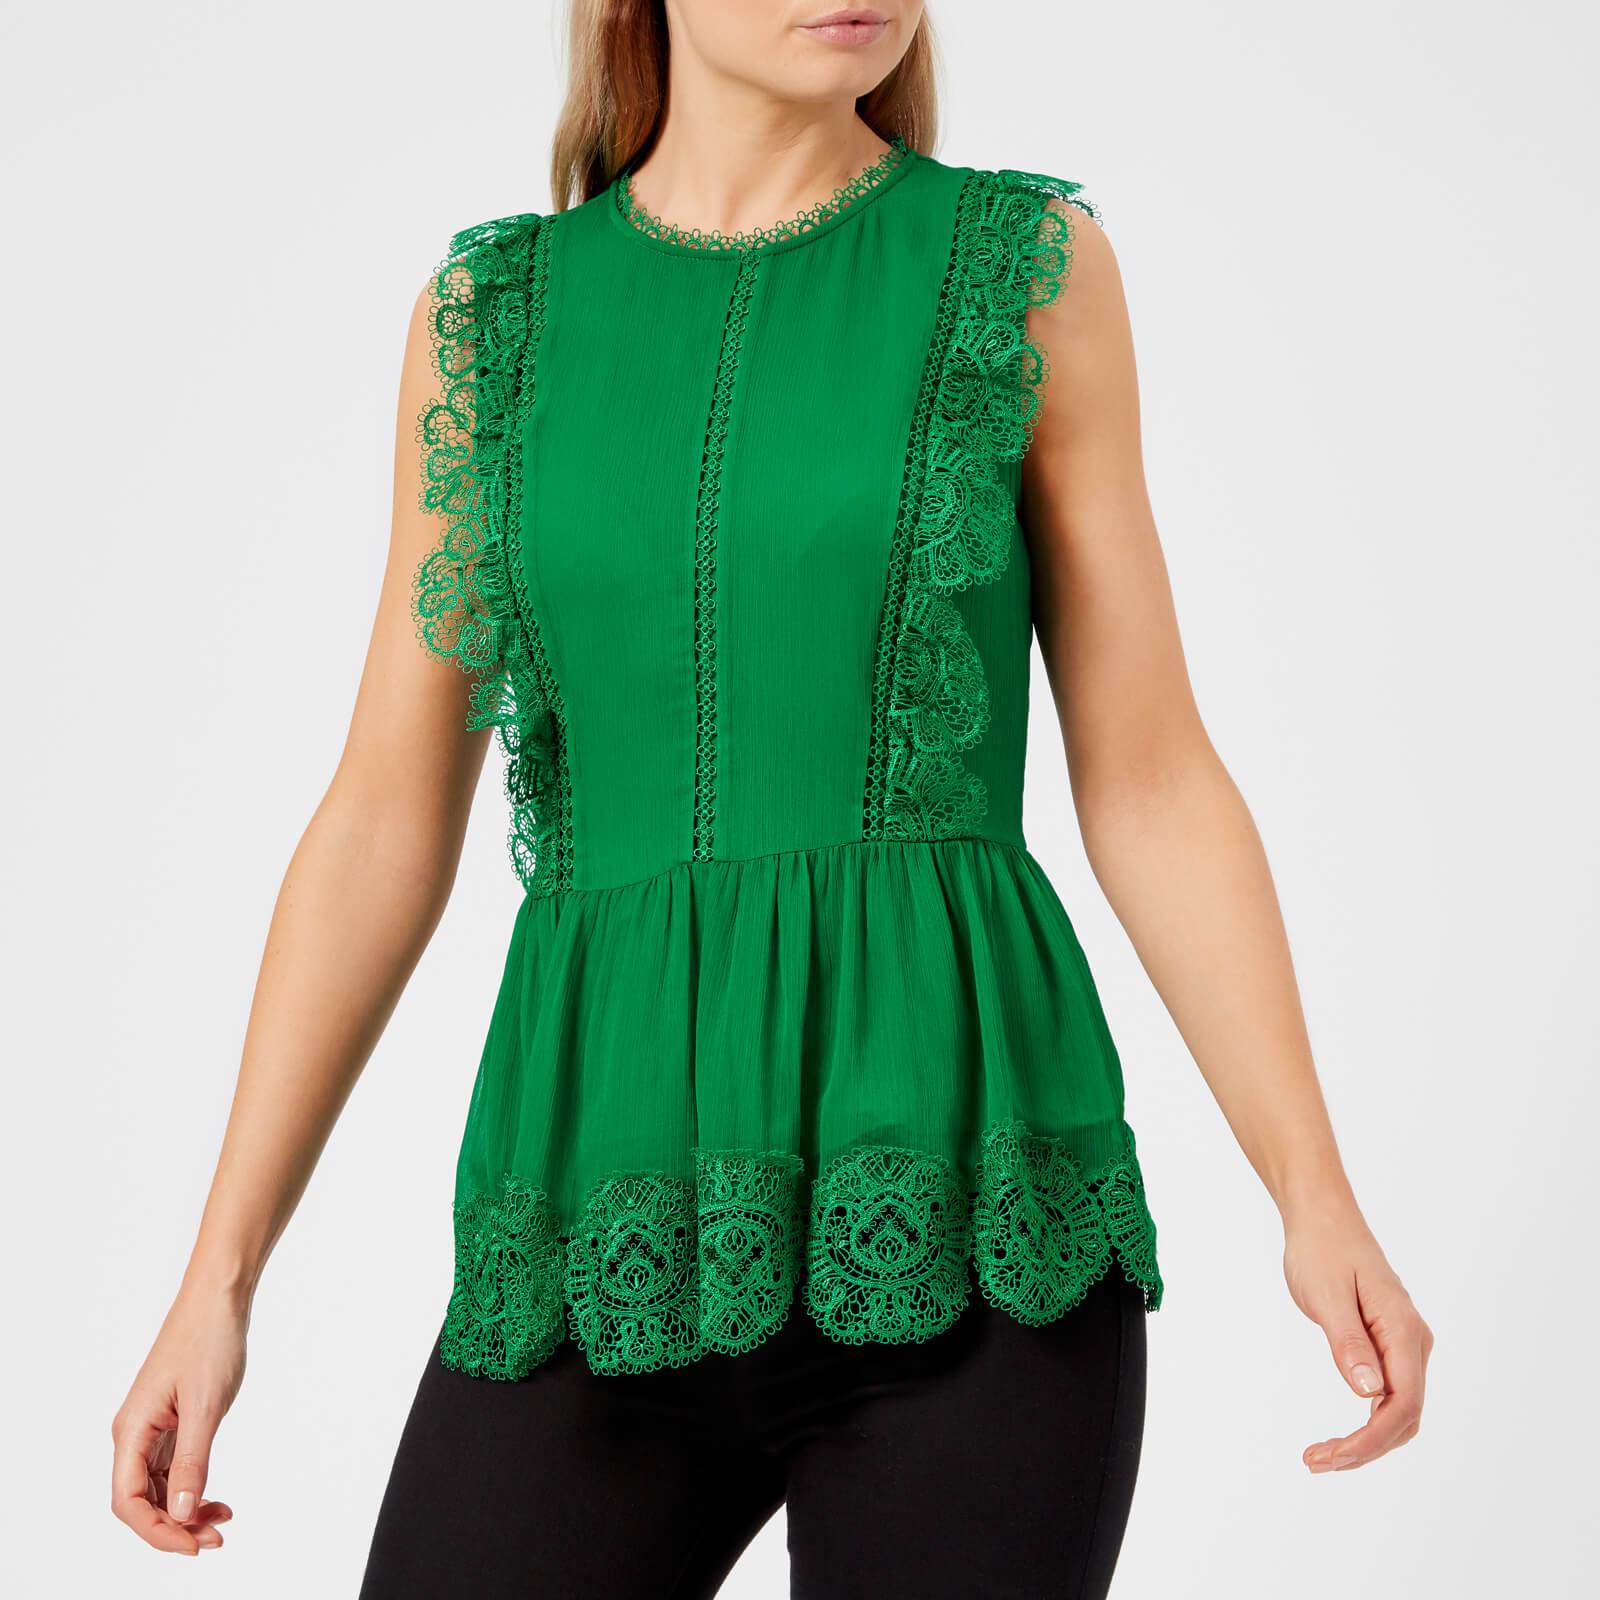 Ted Baker Omarri Mixed Lace Peplum Slvls Top in Green | Lyst